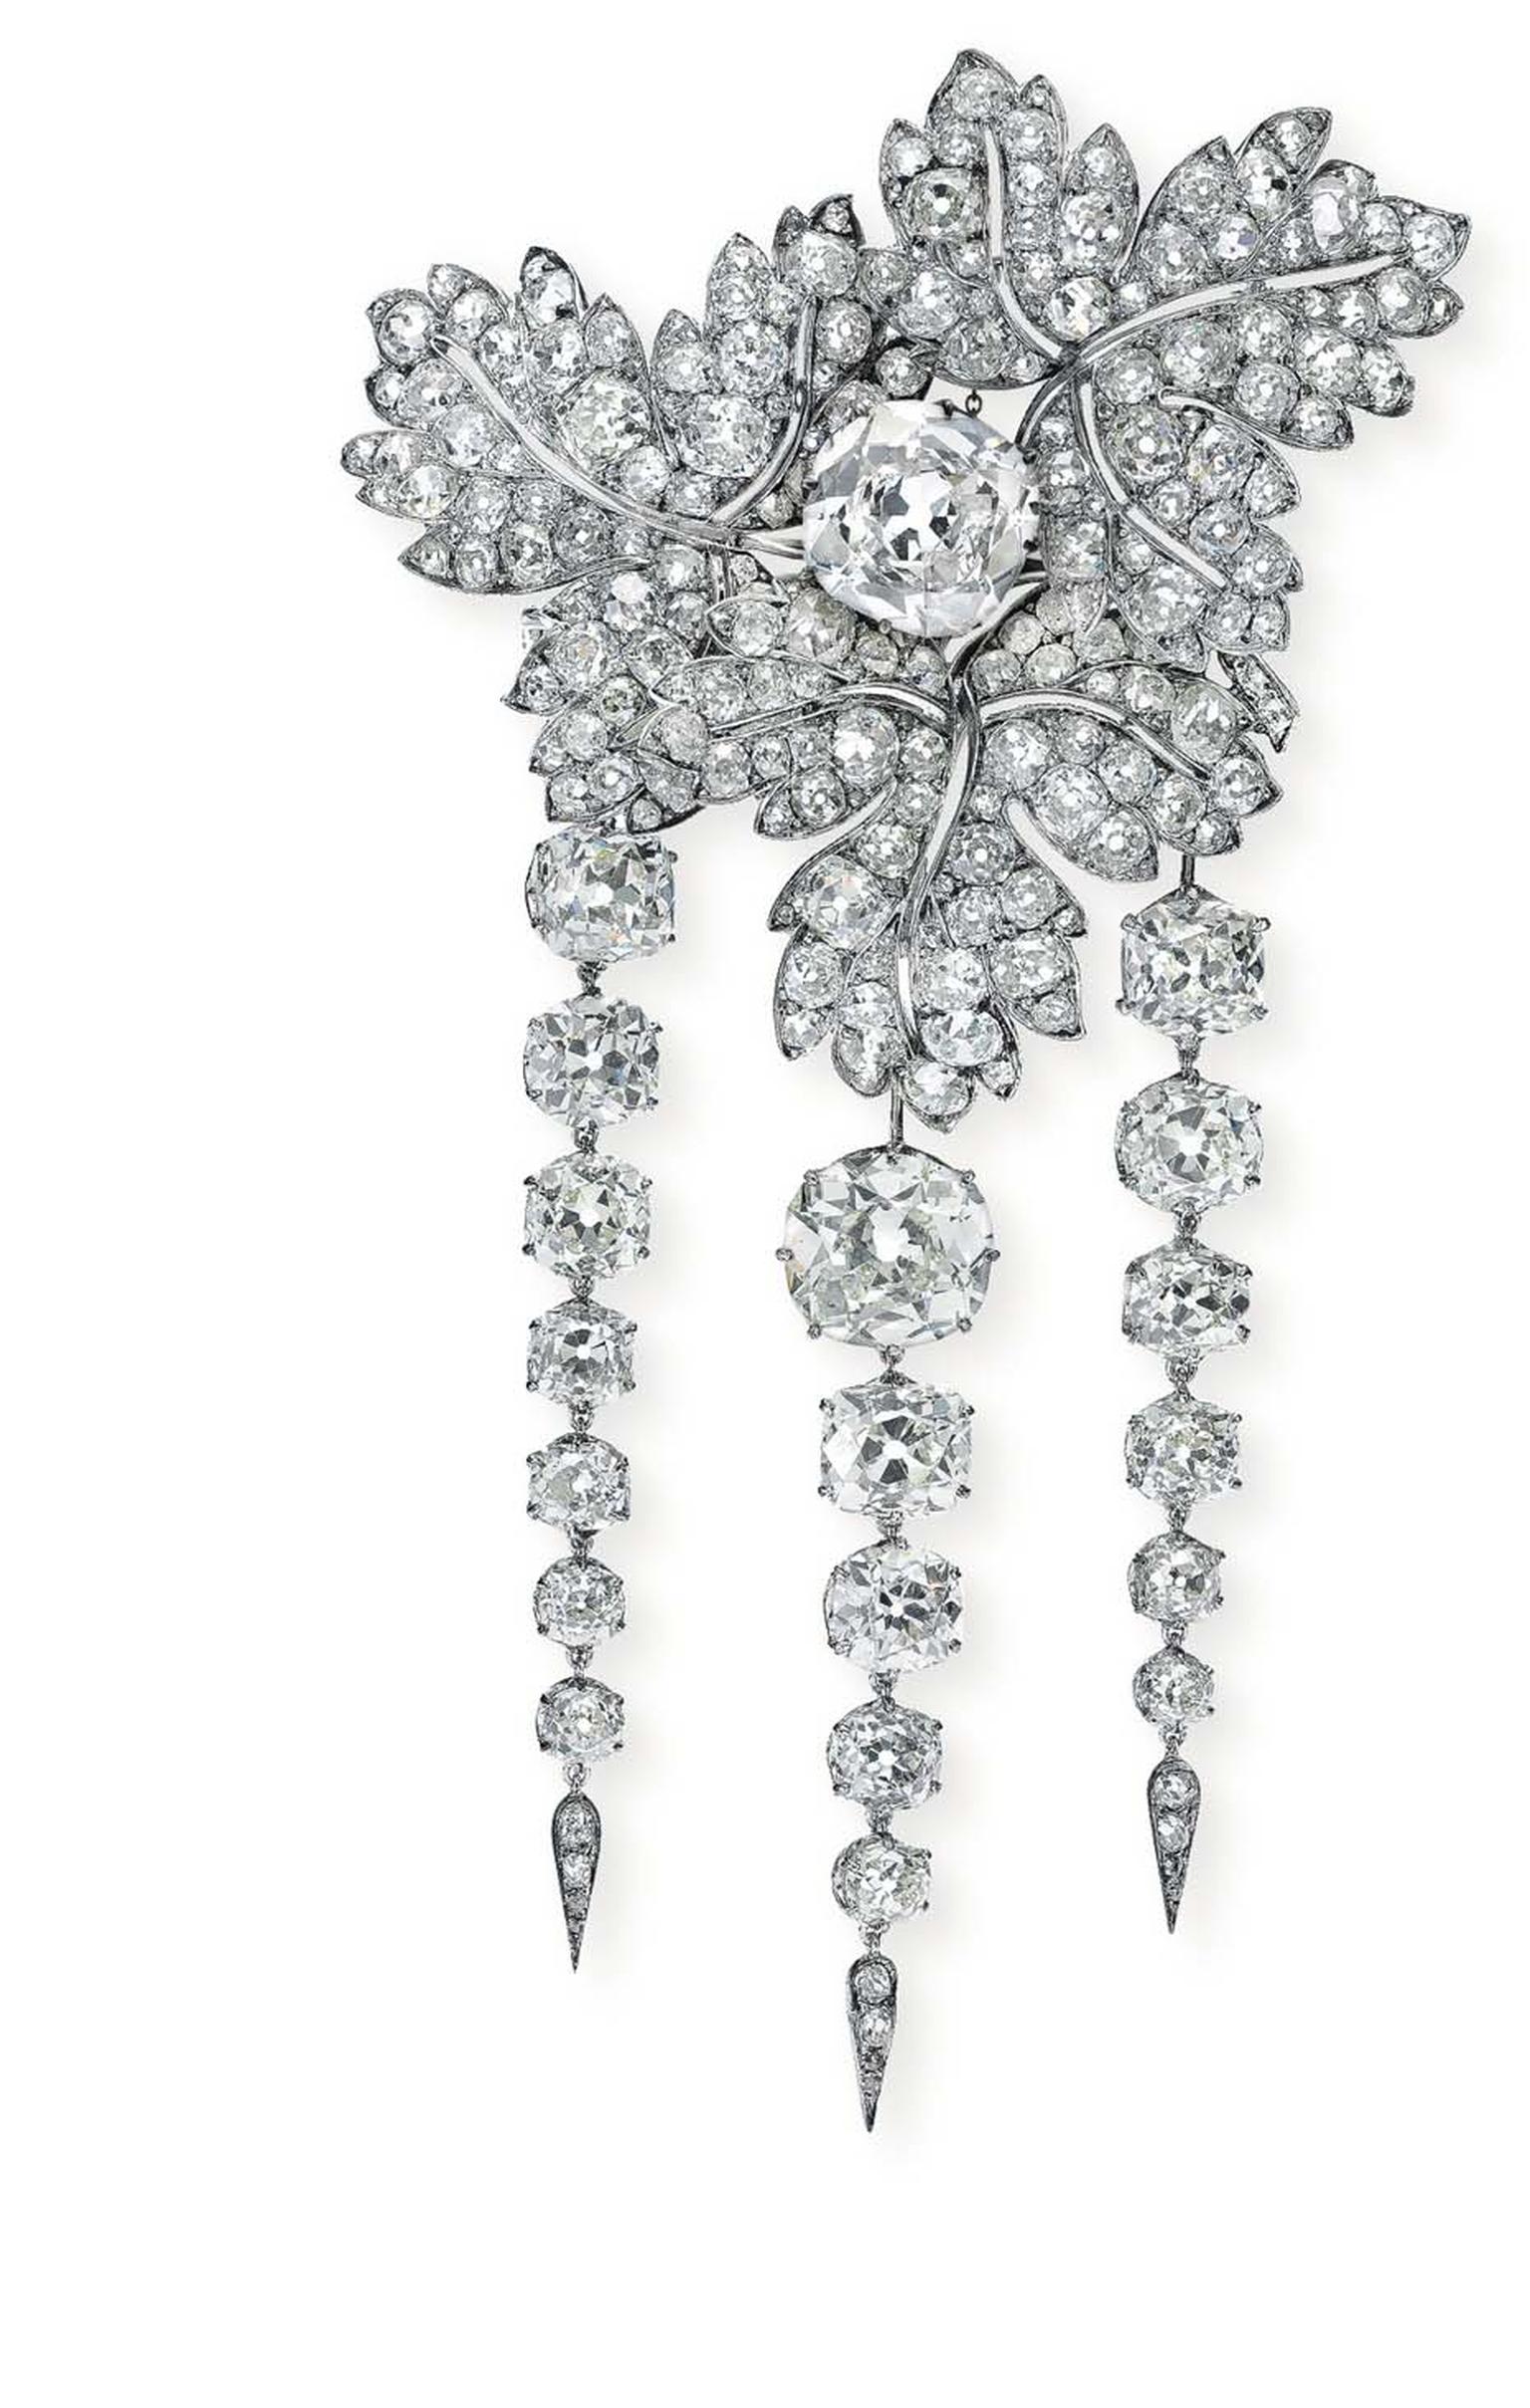 Imperial jewels sell for $3 million in Christie's auction